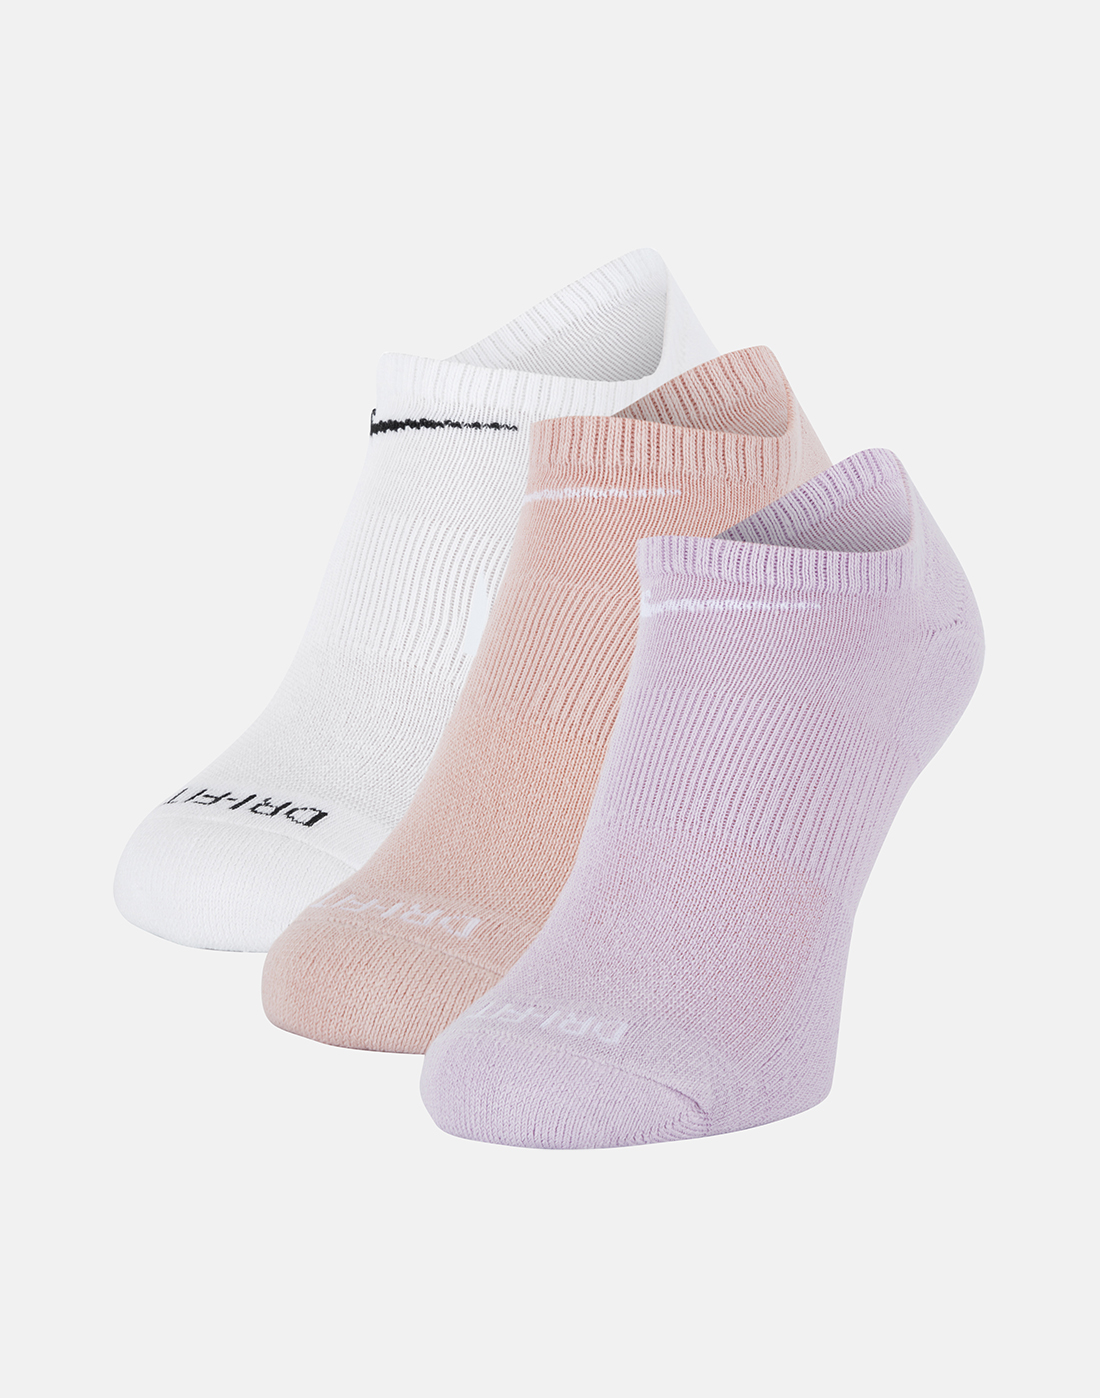 Nike Everyday Plus Cushion 3 Pack No Show Socks - Assorted | Life Style ...